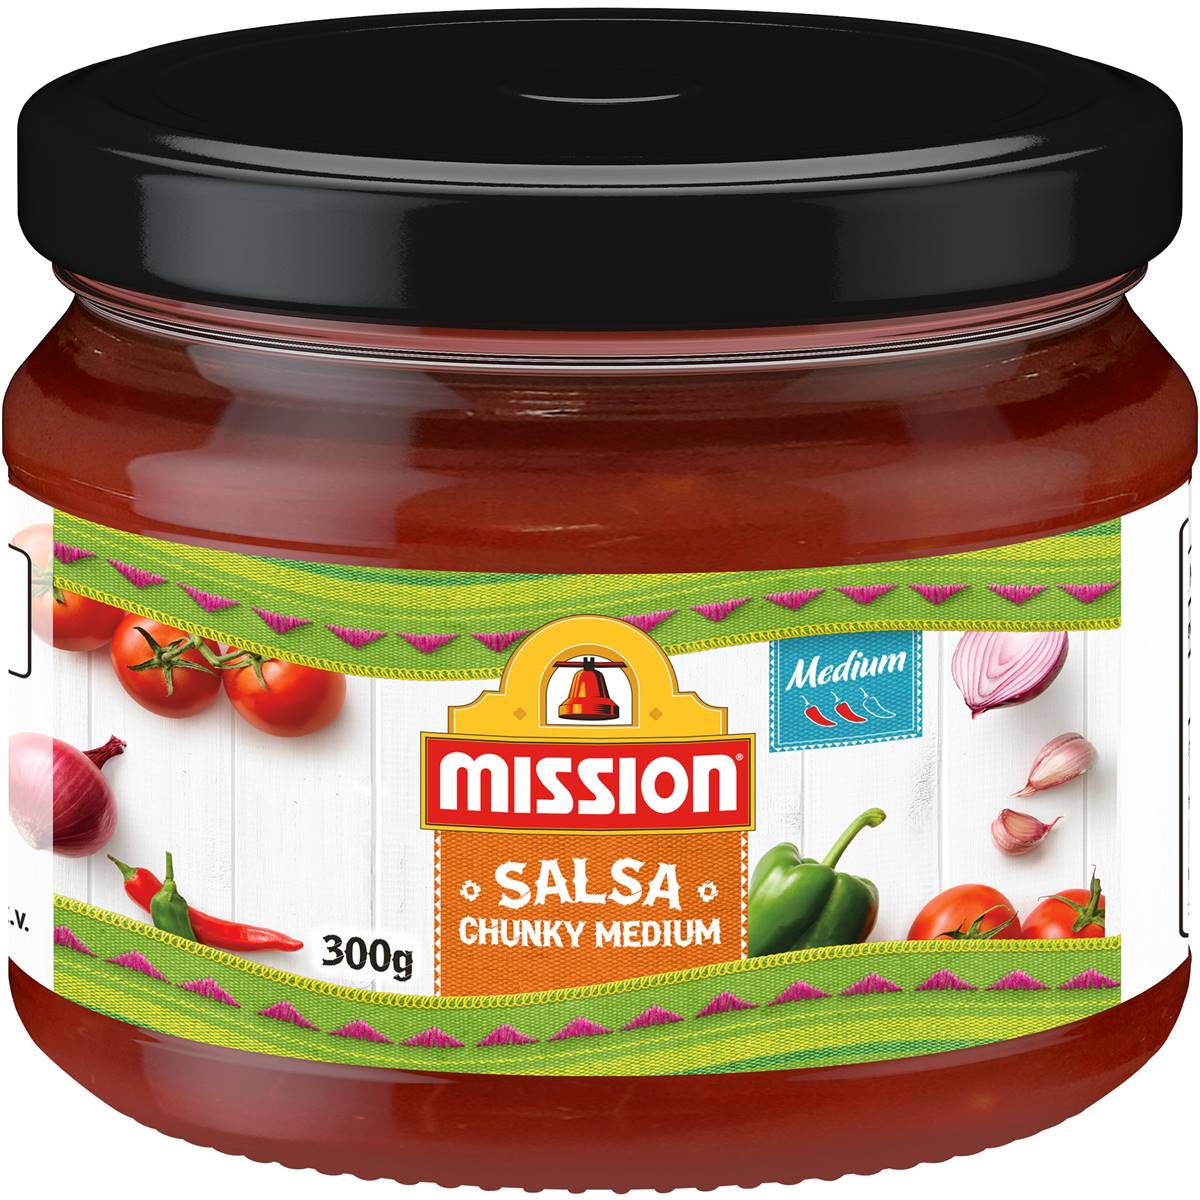 Calories in Mission Chunky Salsa Medium